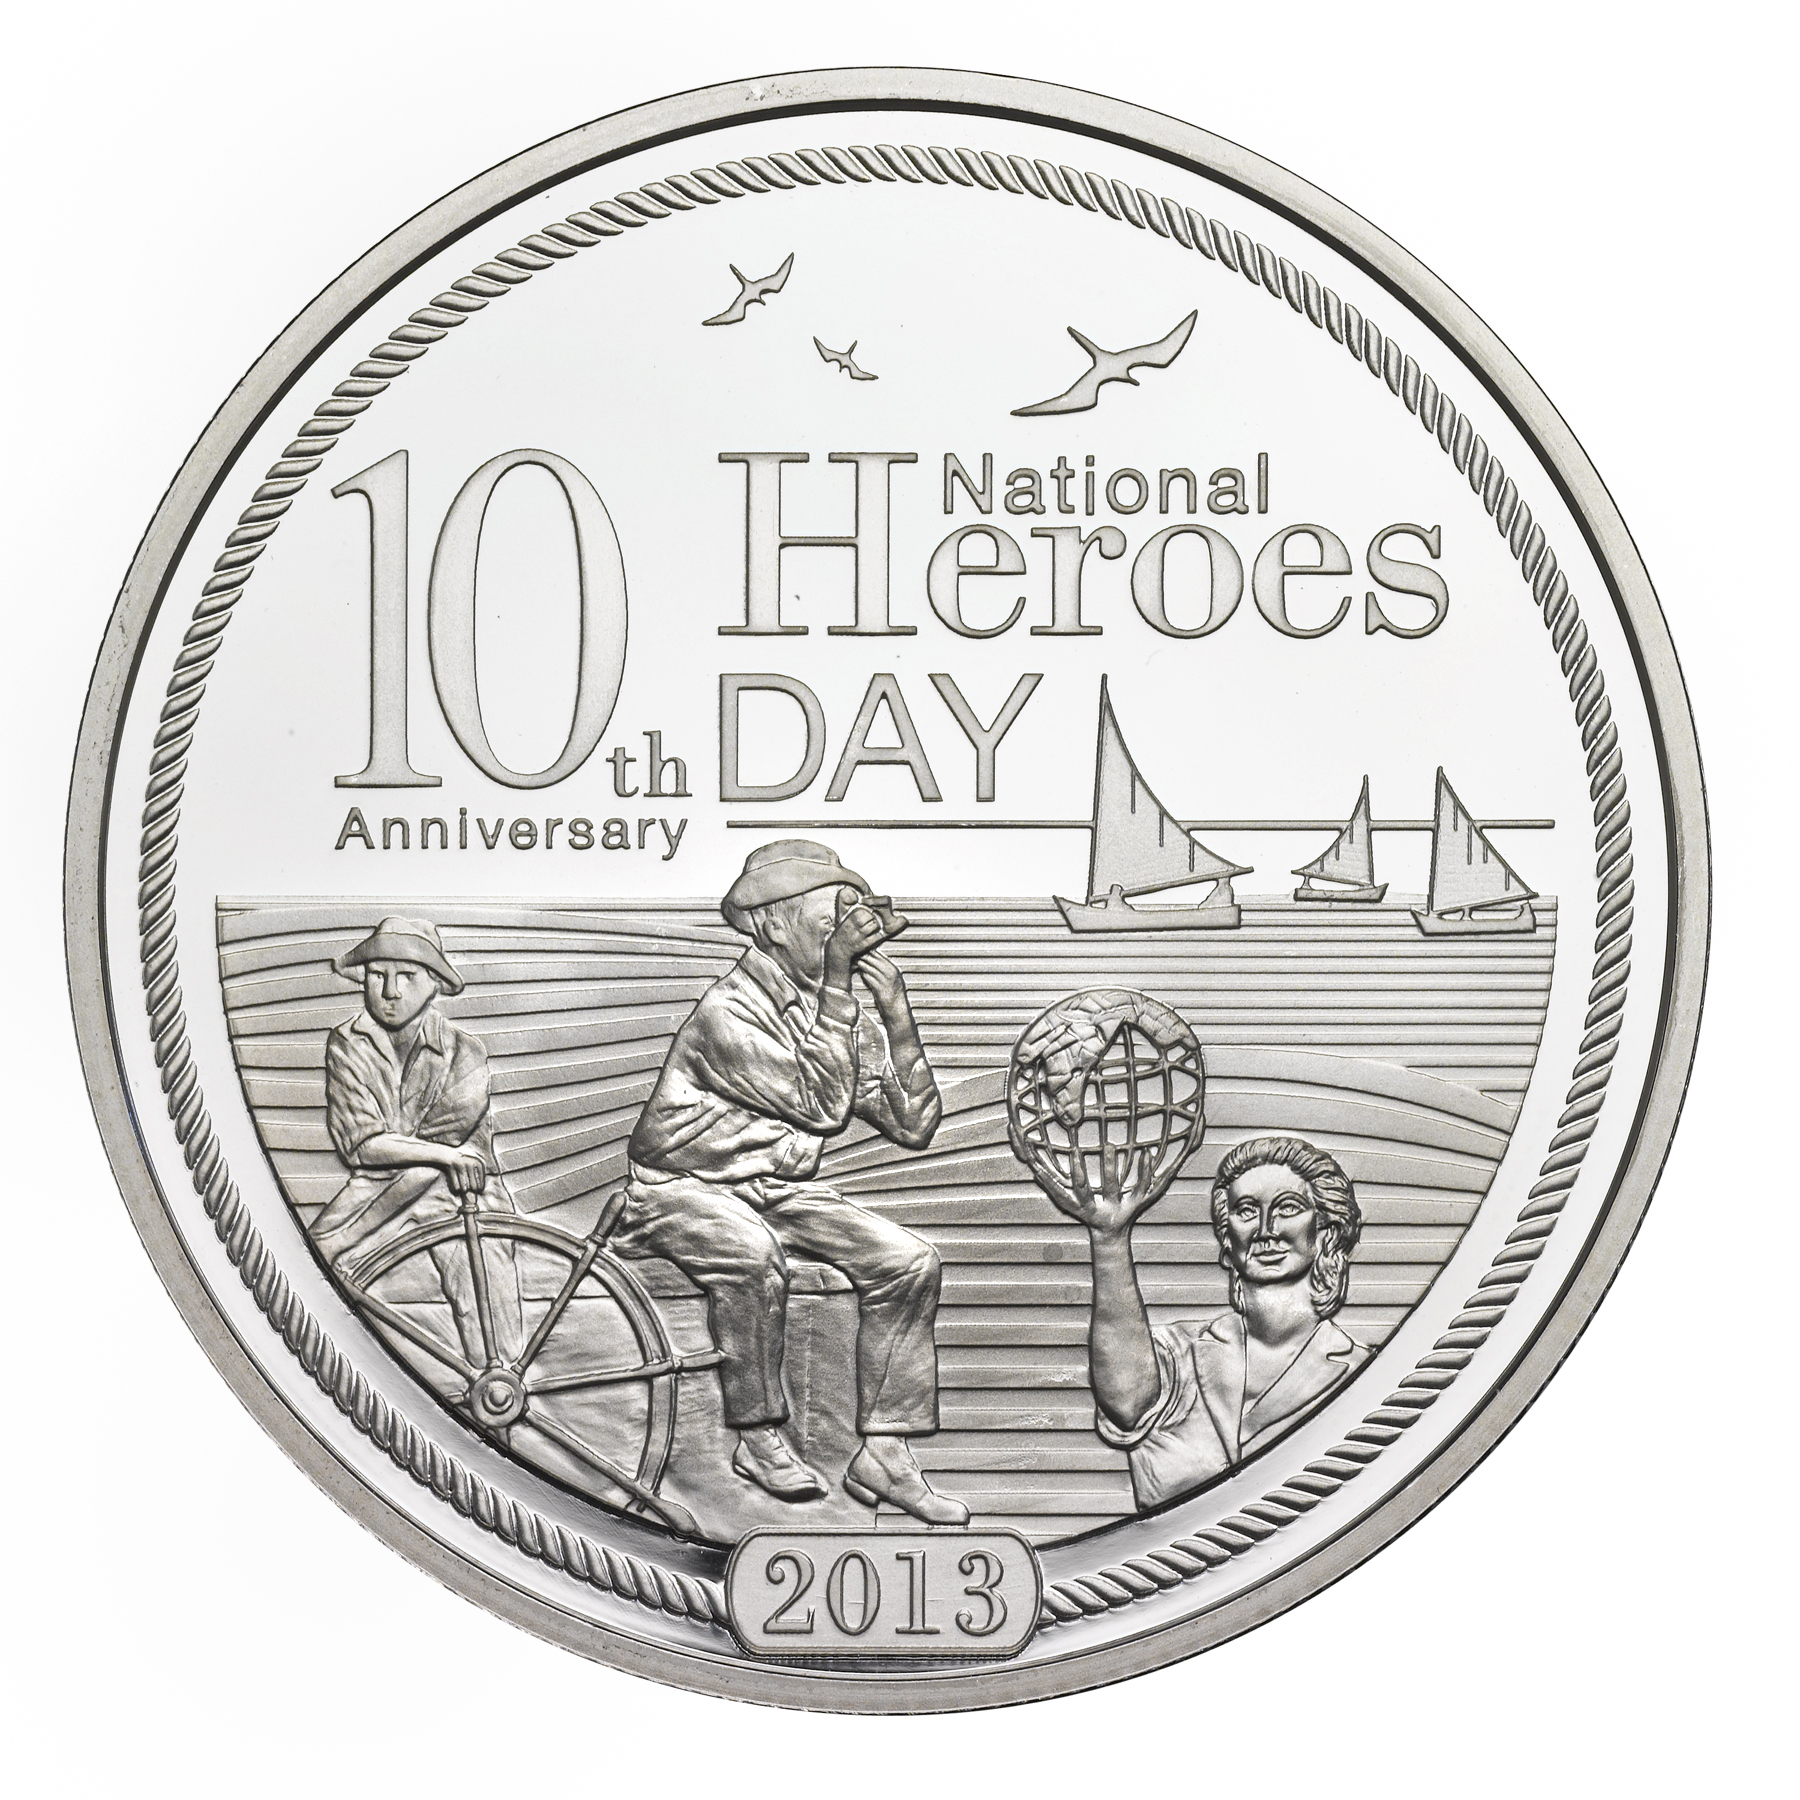 National Heroes Day 10th Anniversary (Silver)